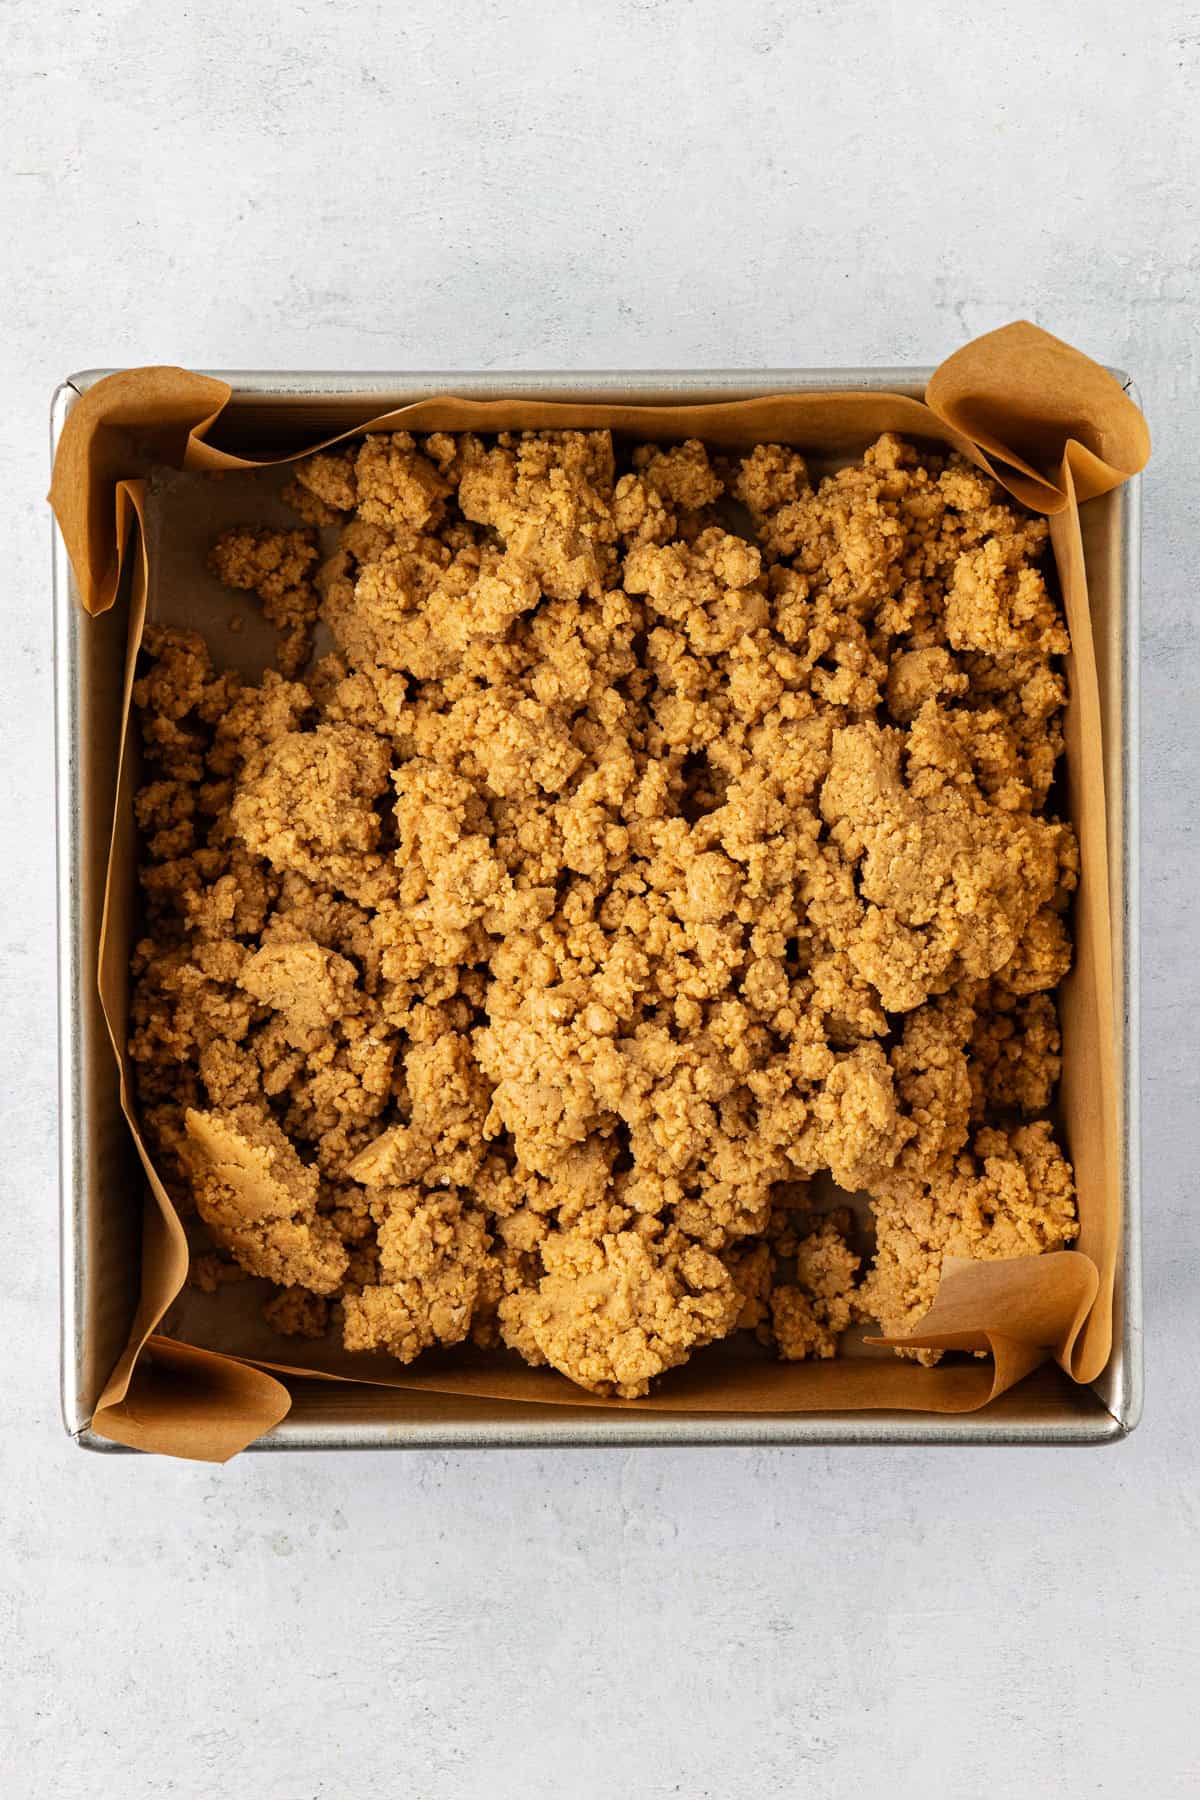 a square pan lined with brown parchment paper with a peanut butter and graham cracker mixture inside of it